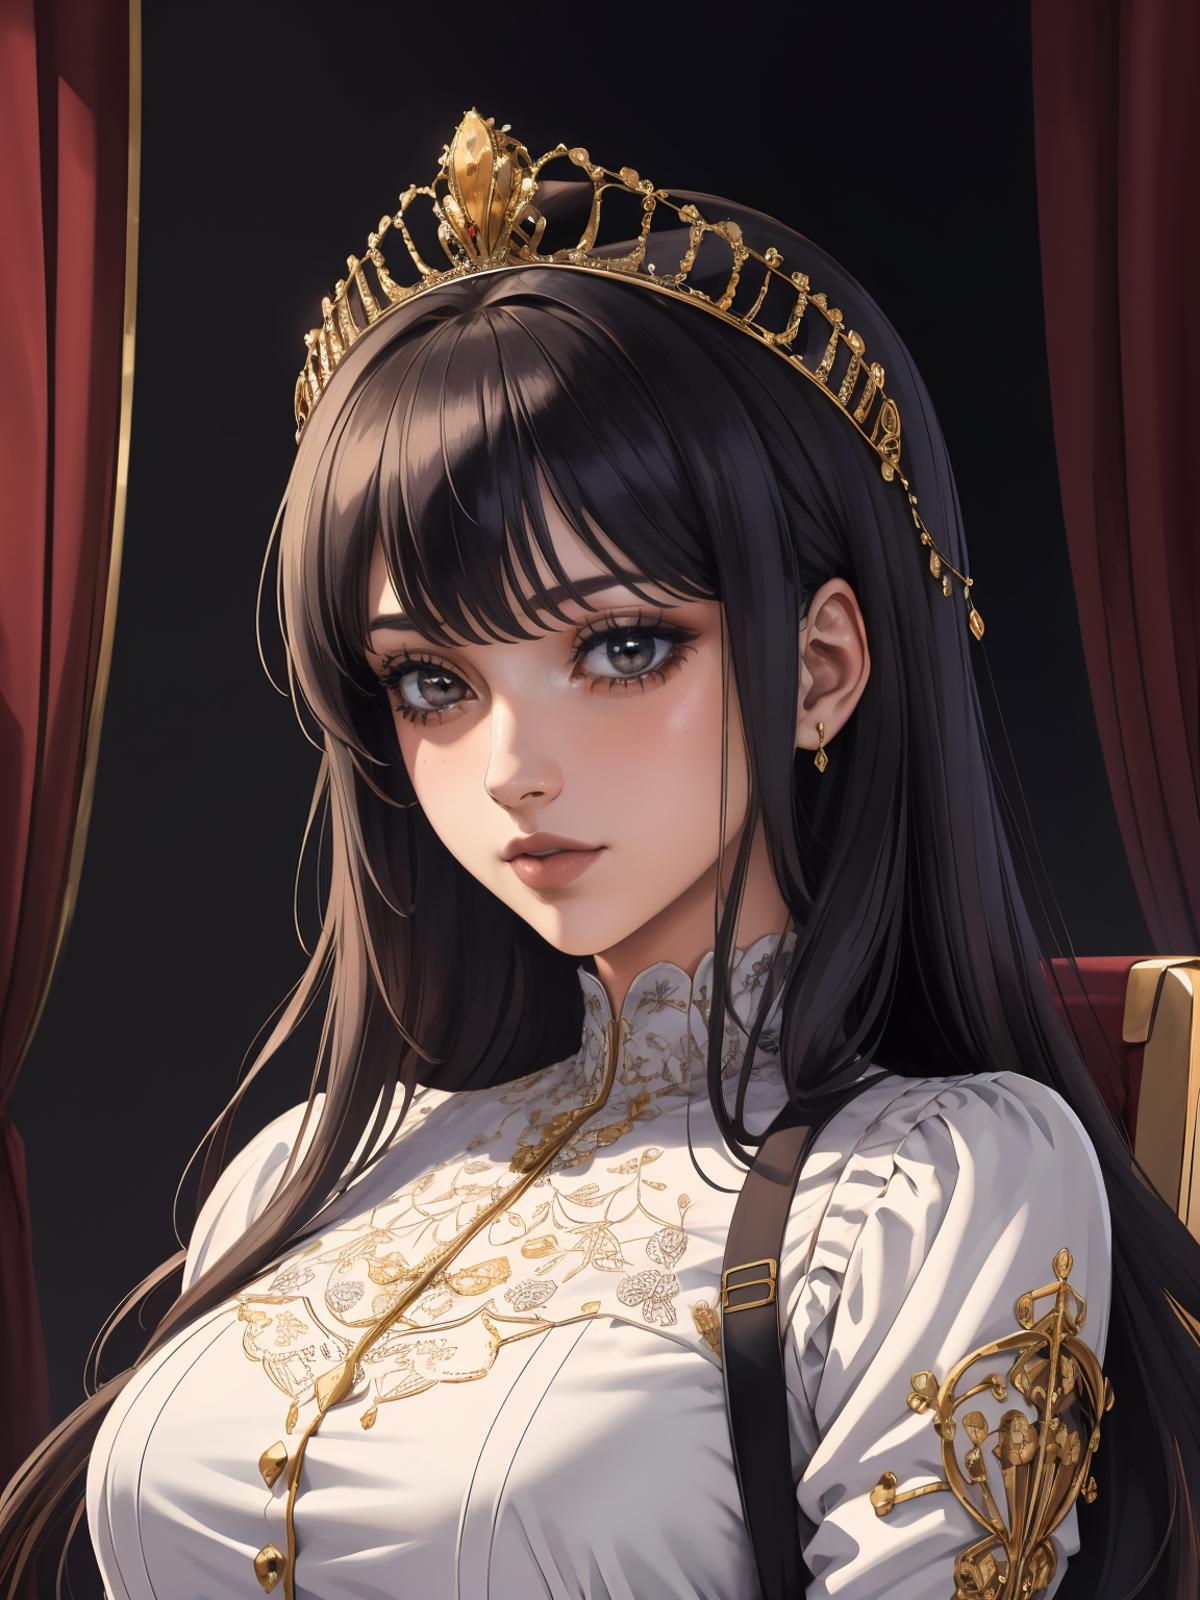 A beautifully rendered anime-style woman with a crown and long hair.